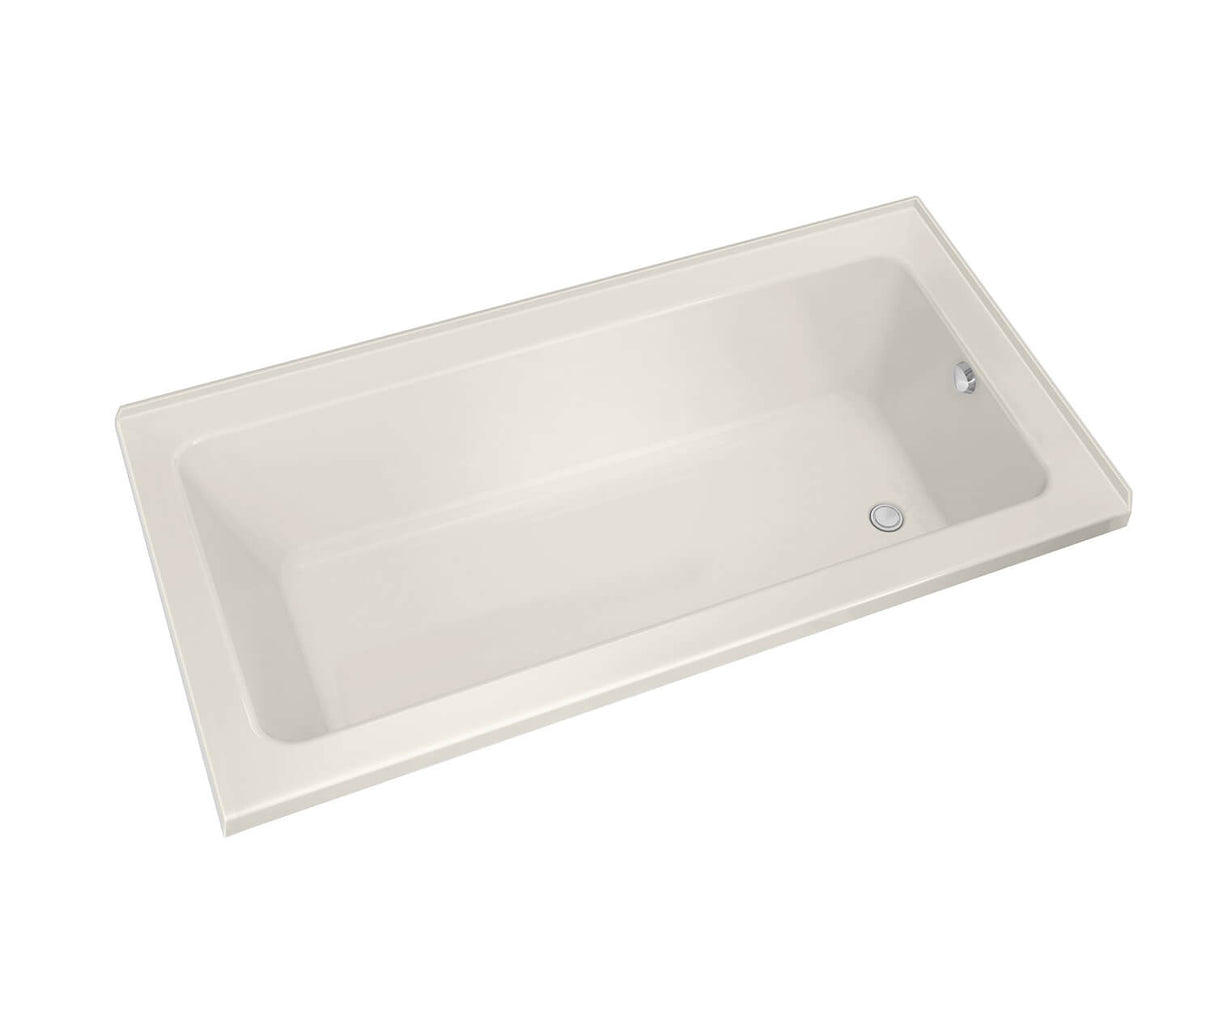 MAAX 106206-R-103-007 Pose 6632 IF Acrylic Corner Right Right-Hand Drain Aeroeffect Bathtub in Biscuit